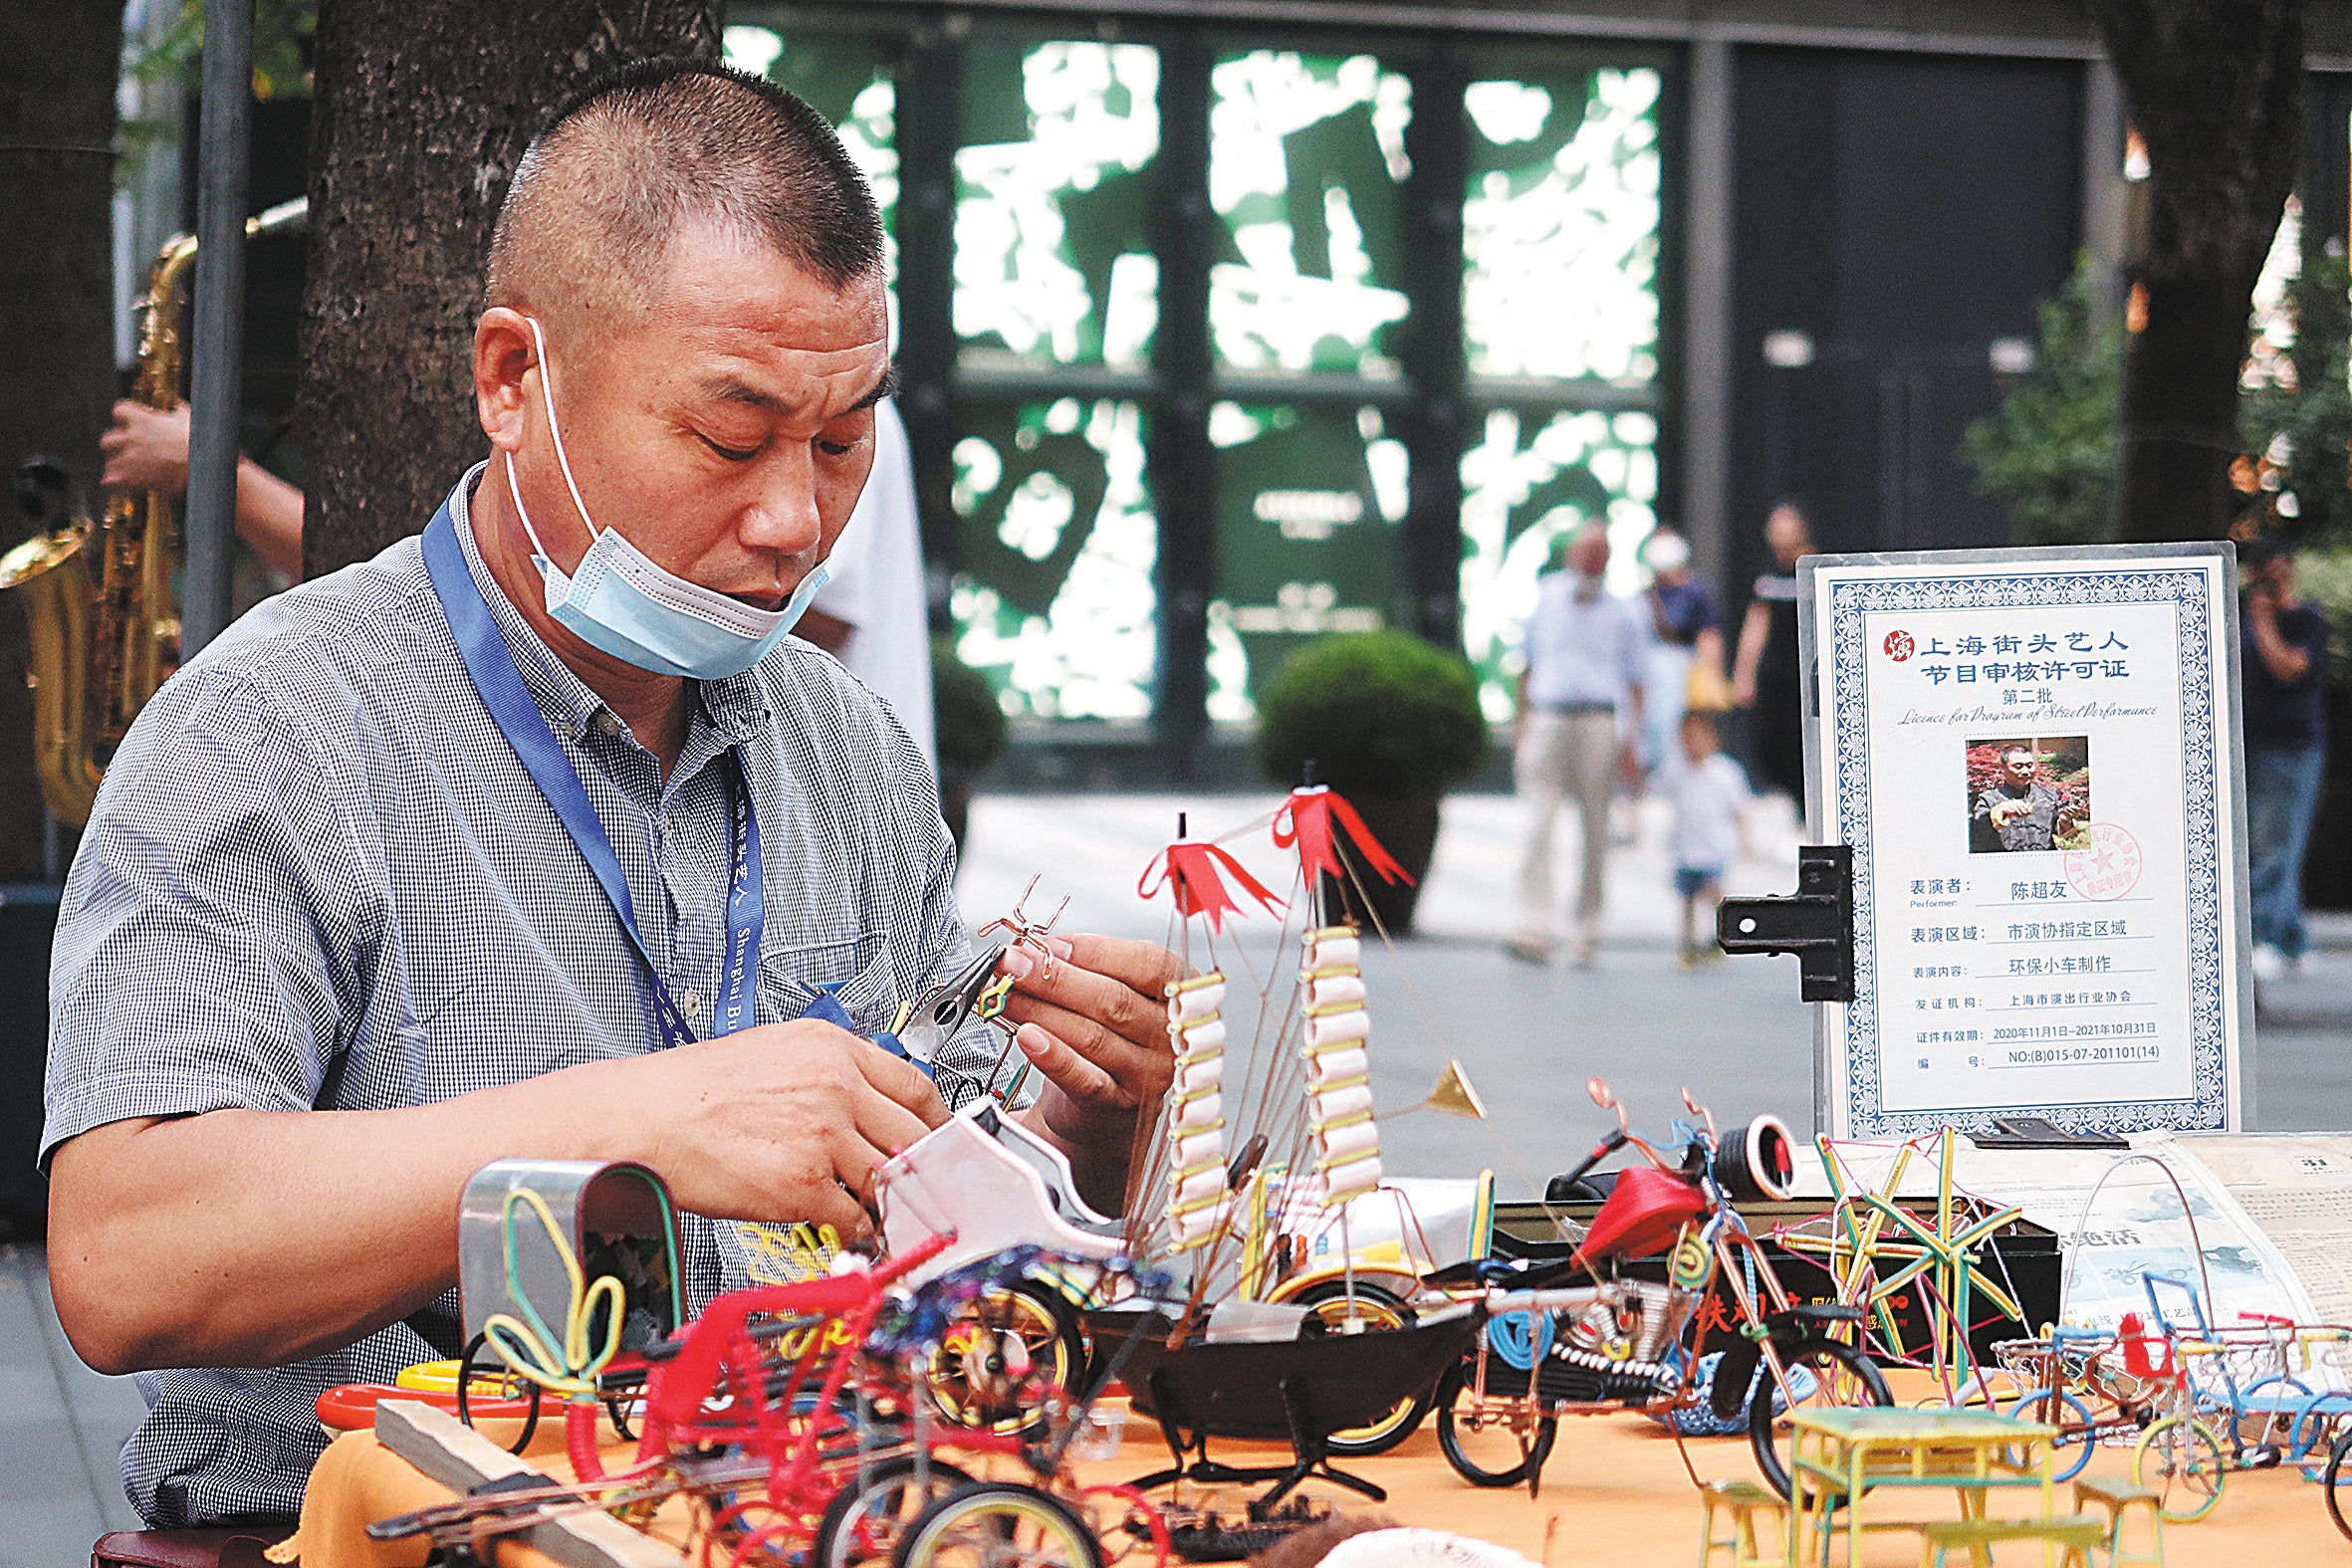 A handicraft artist makes models in the square in front of Jing’an Park in Shanghai